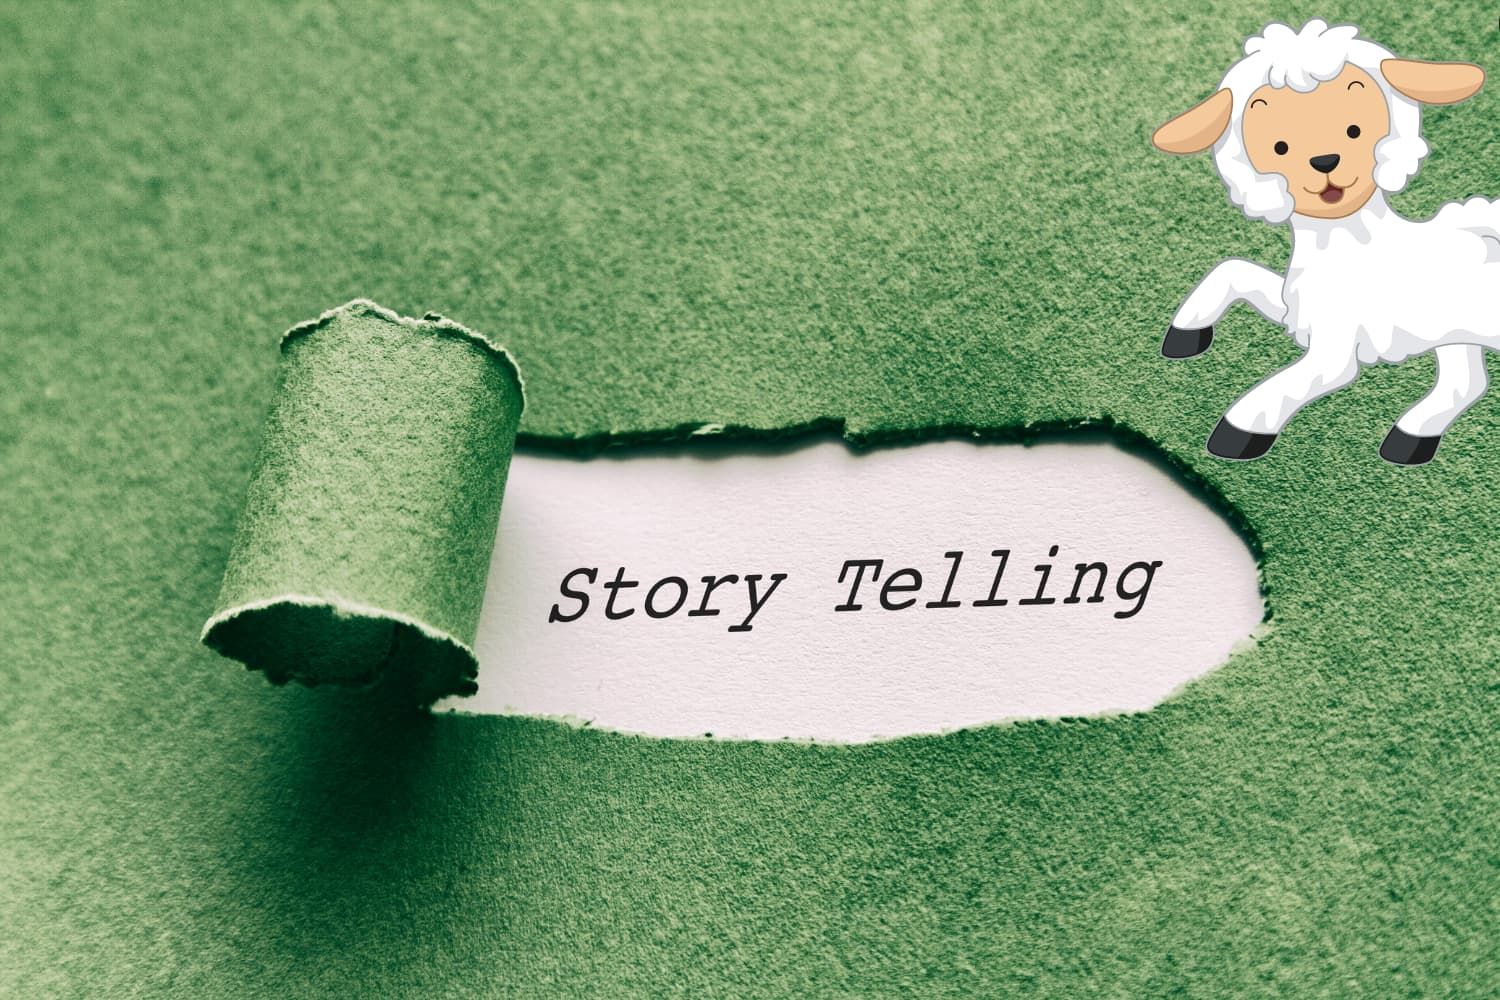 Storytelling%20tips%20-%20NT%20Parable%20of%20the%20lost%20sheep%20-%20Four%20tips%20to%20help%20you%20tell%20the%20story-0b70d295 Safety / security